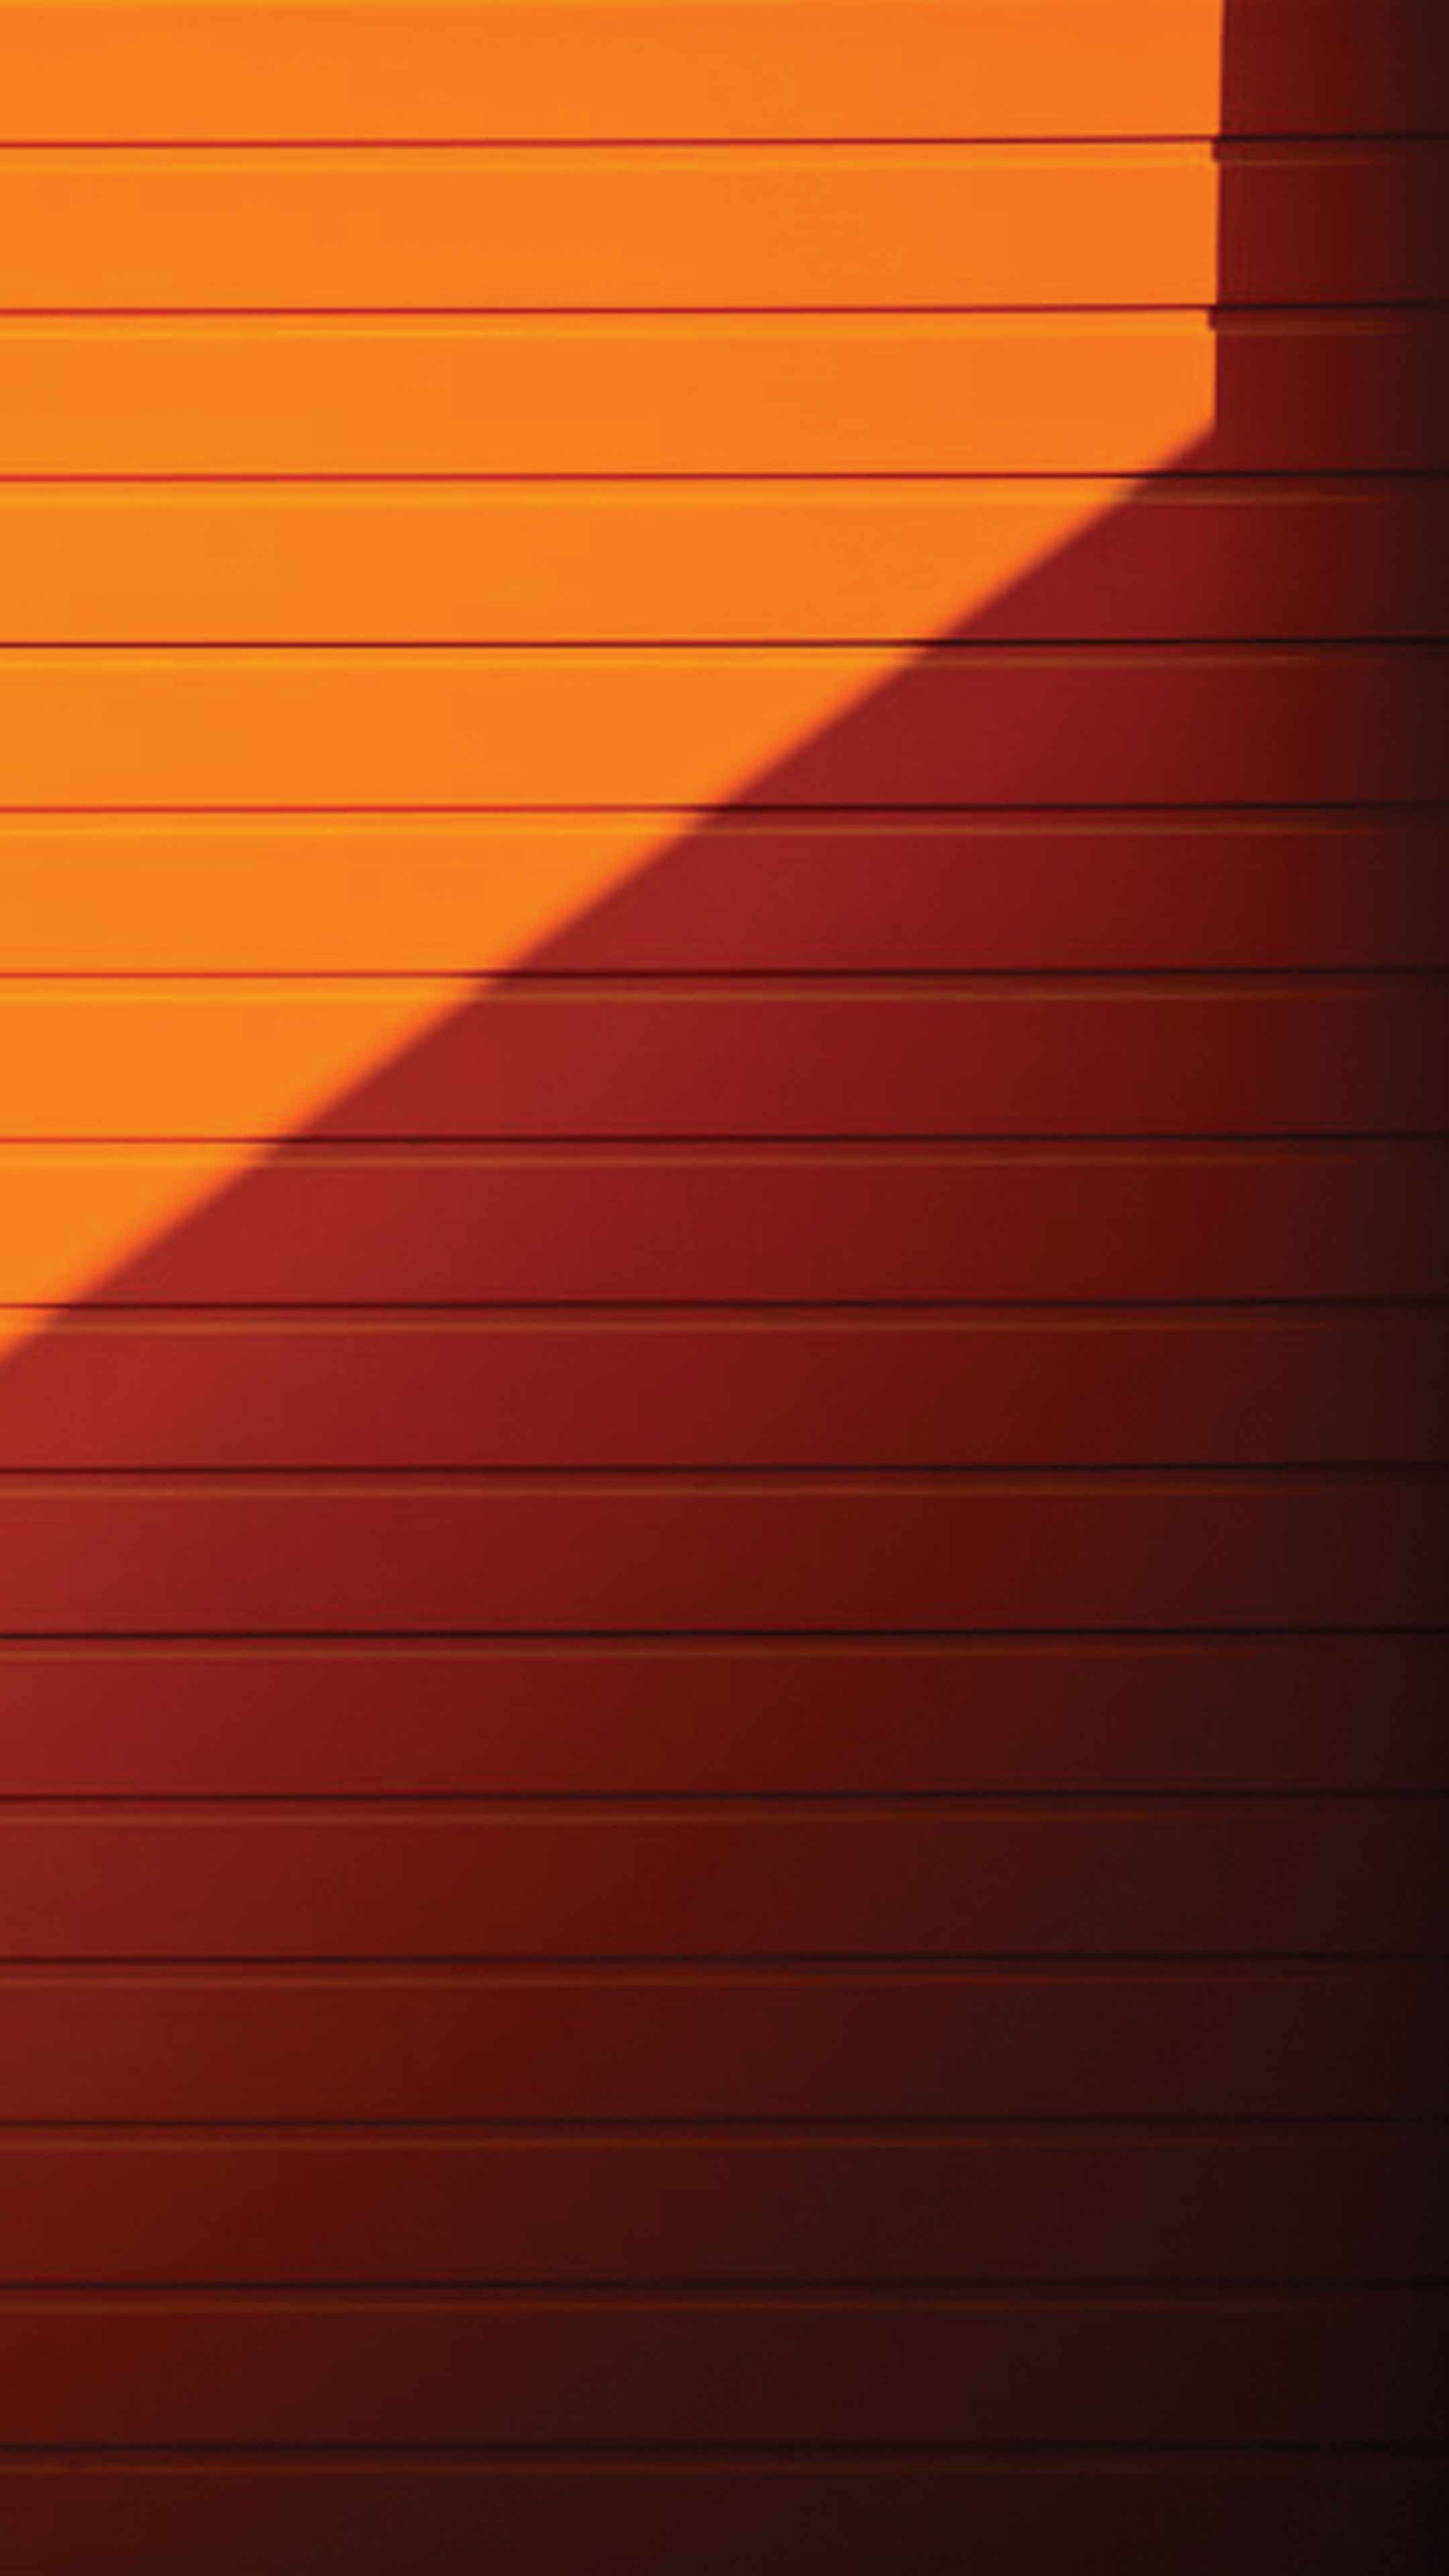 25 Perfect wallpaper aesthetic warna orange You Can Use It free ...